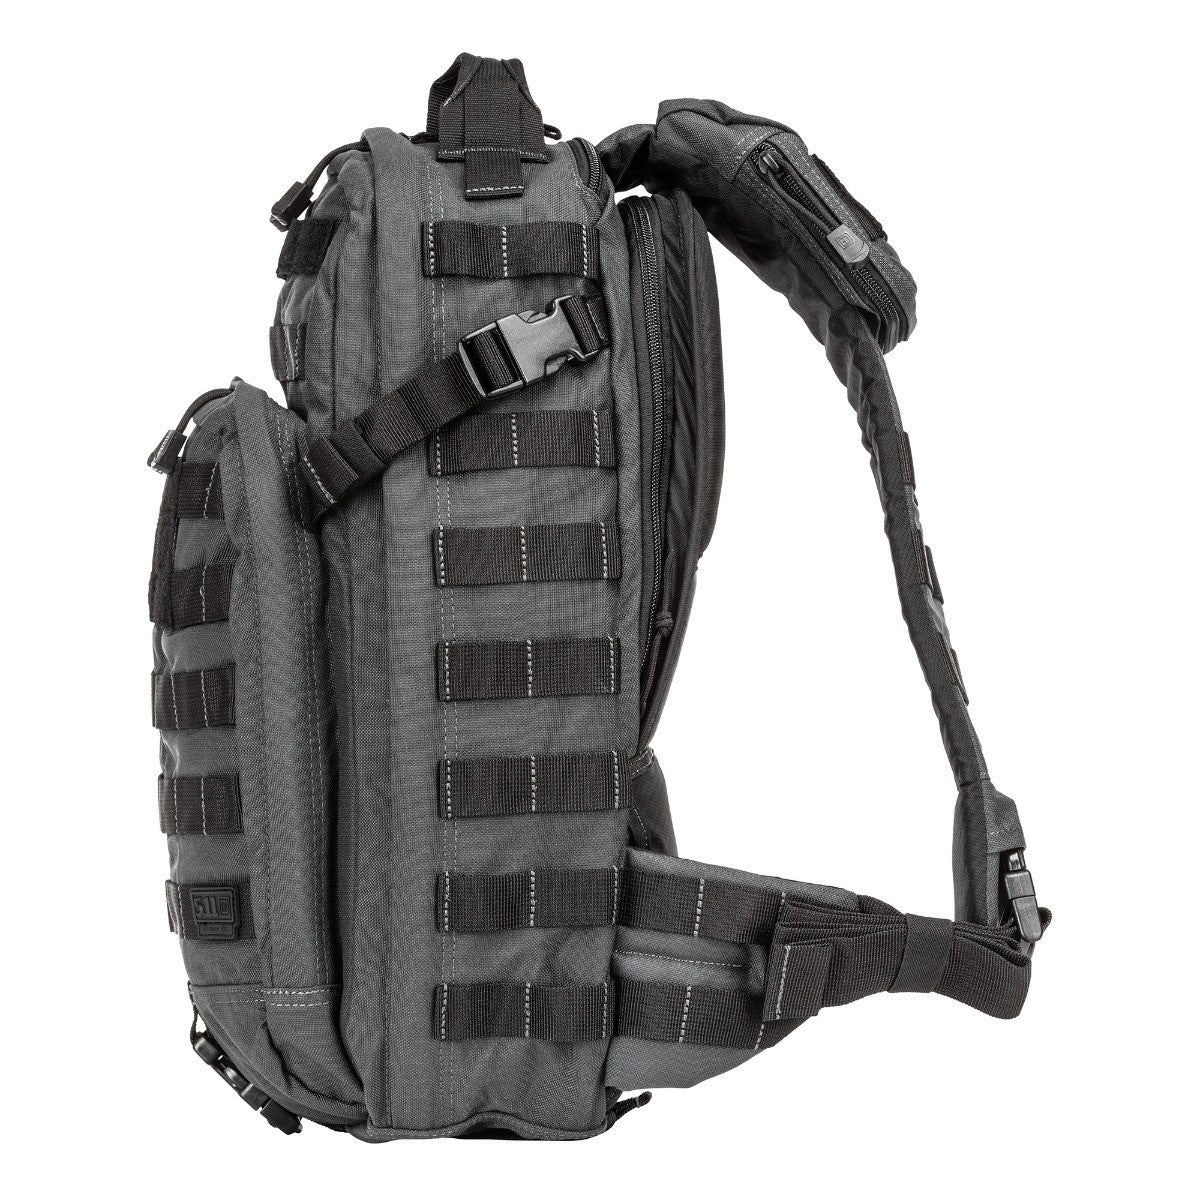 a back pack is shown on a white background